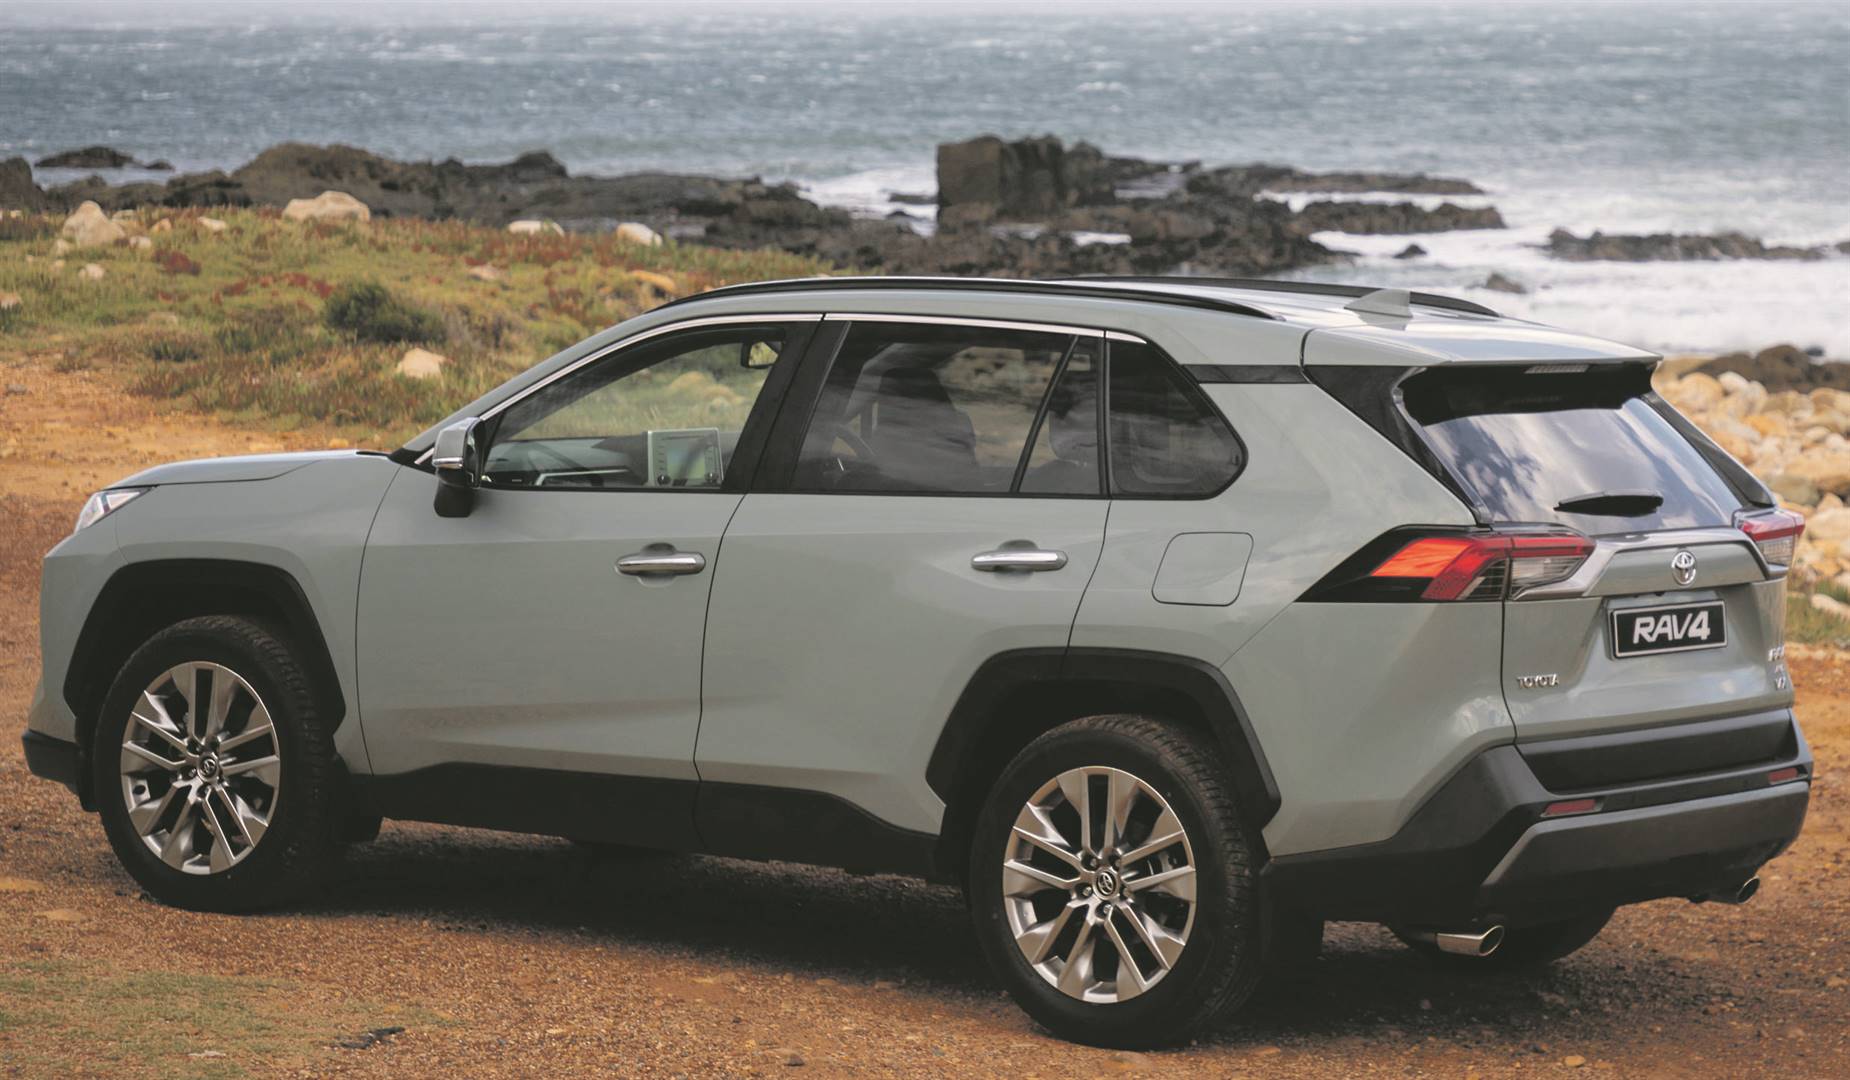 The new Rav4 is an exciting redesign of Toyota’s previous SUV model.